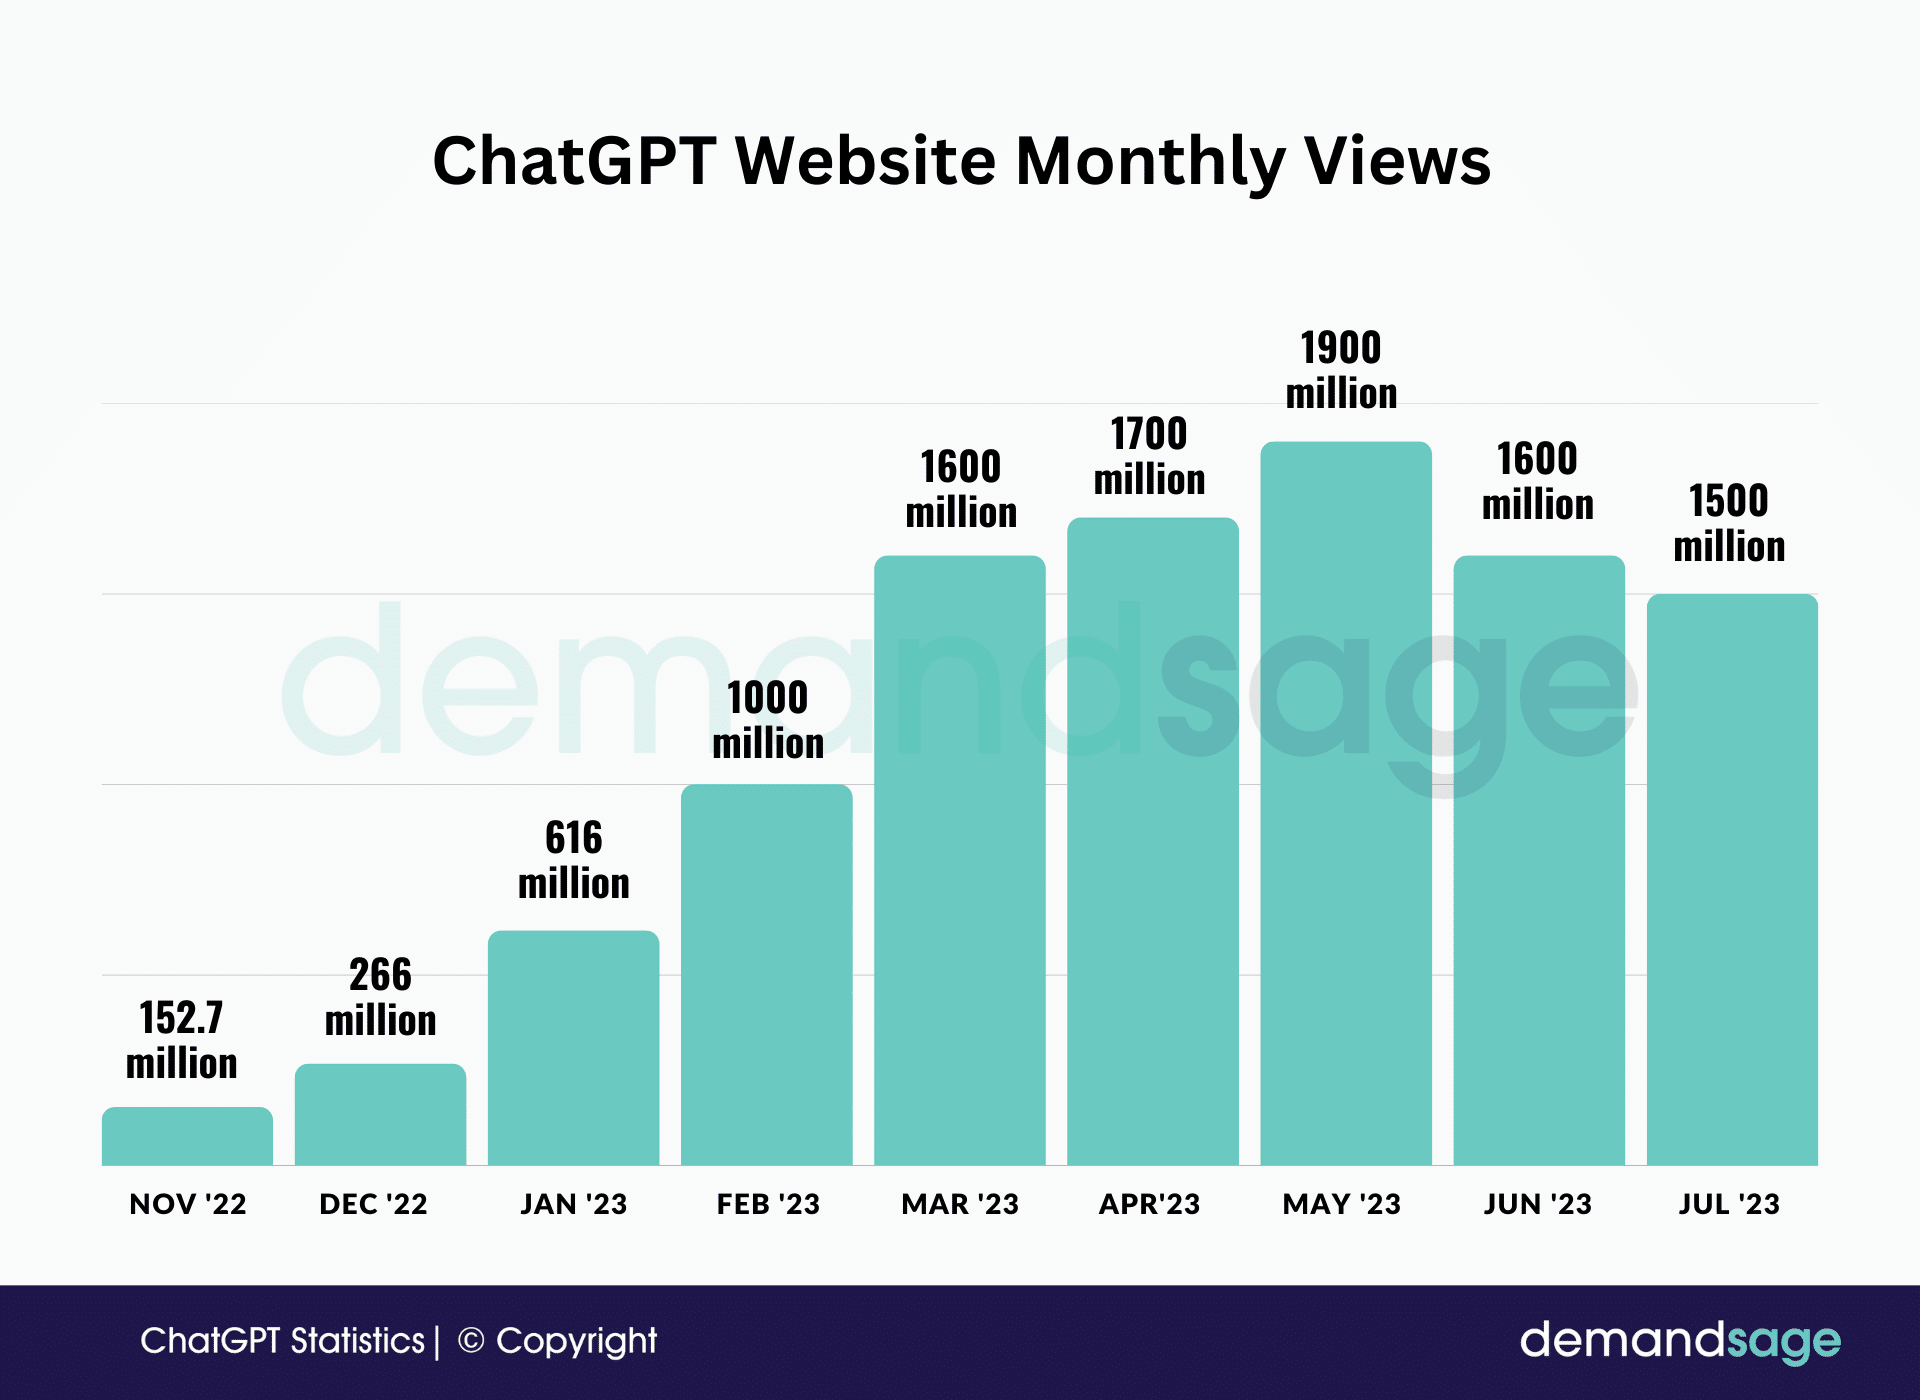 ChatGPT Website Monthly Views